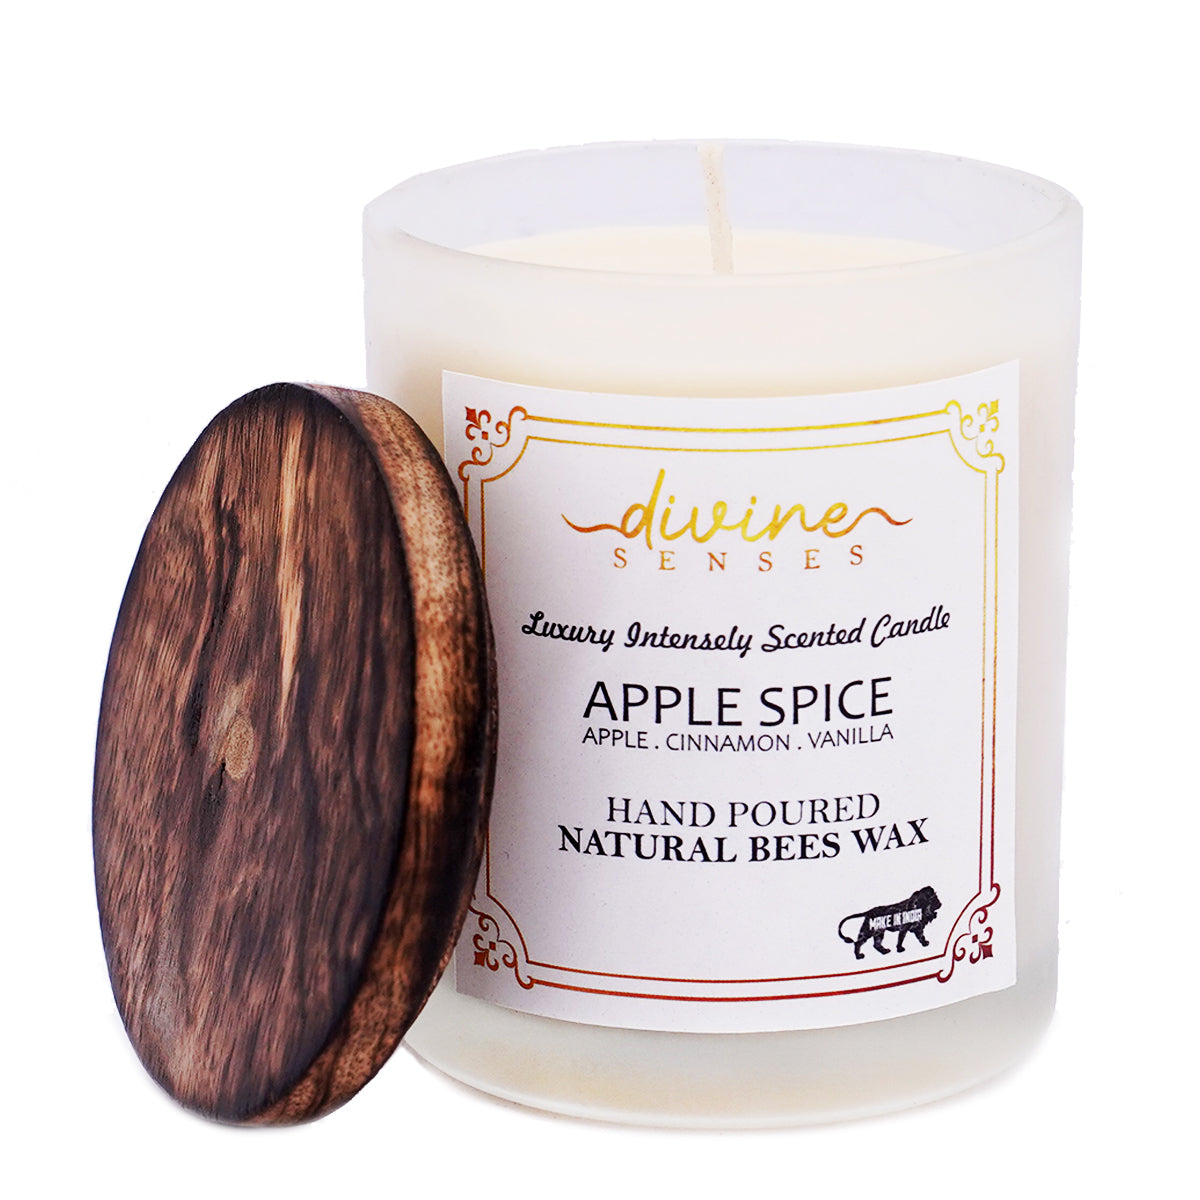 Beeswax Scented Candle with Glass Jar - Apple, Cinnamon & Vanilla